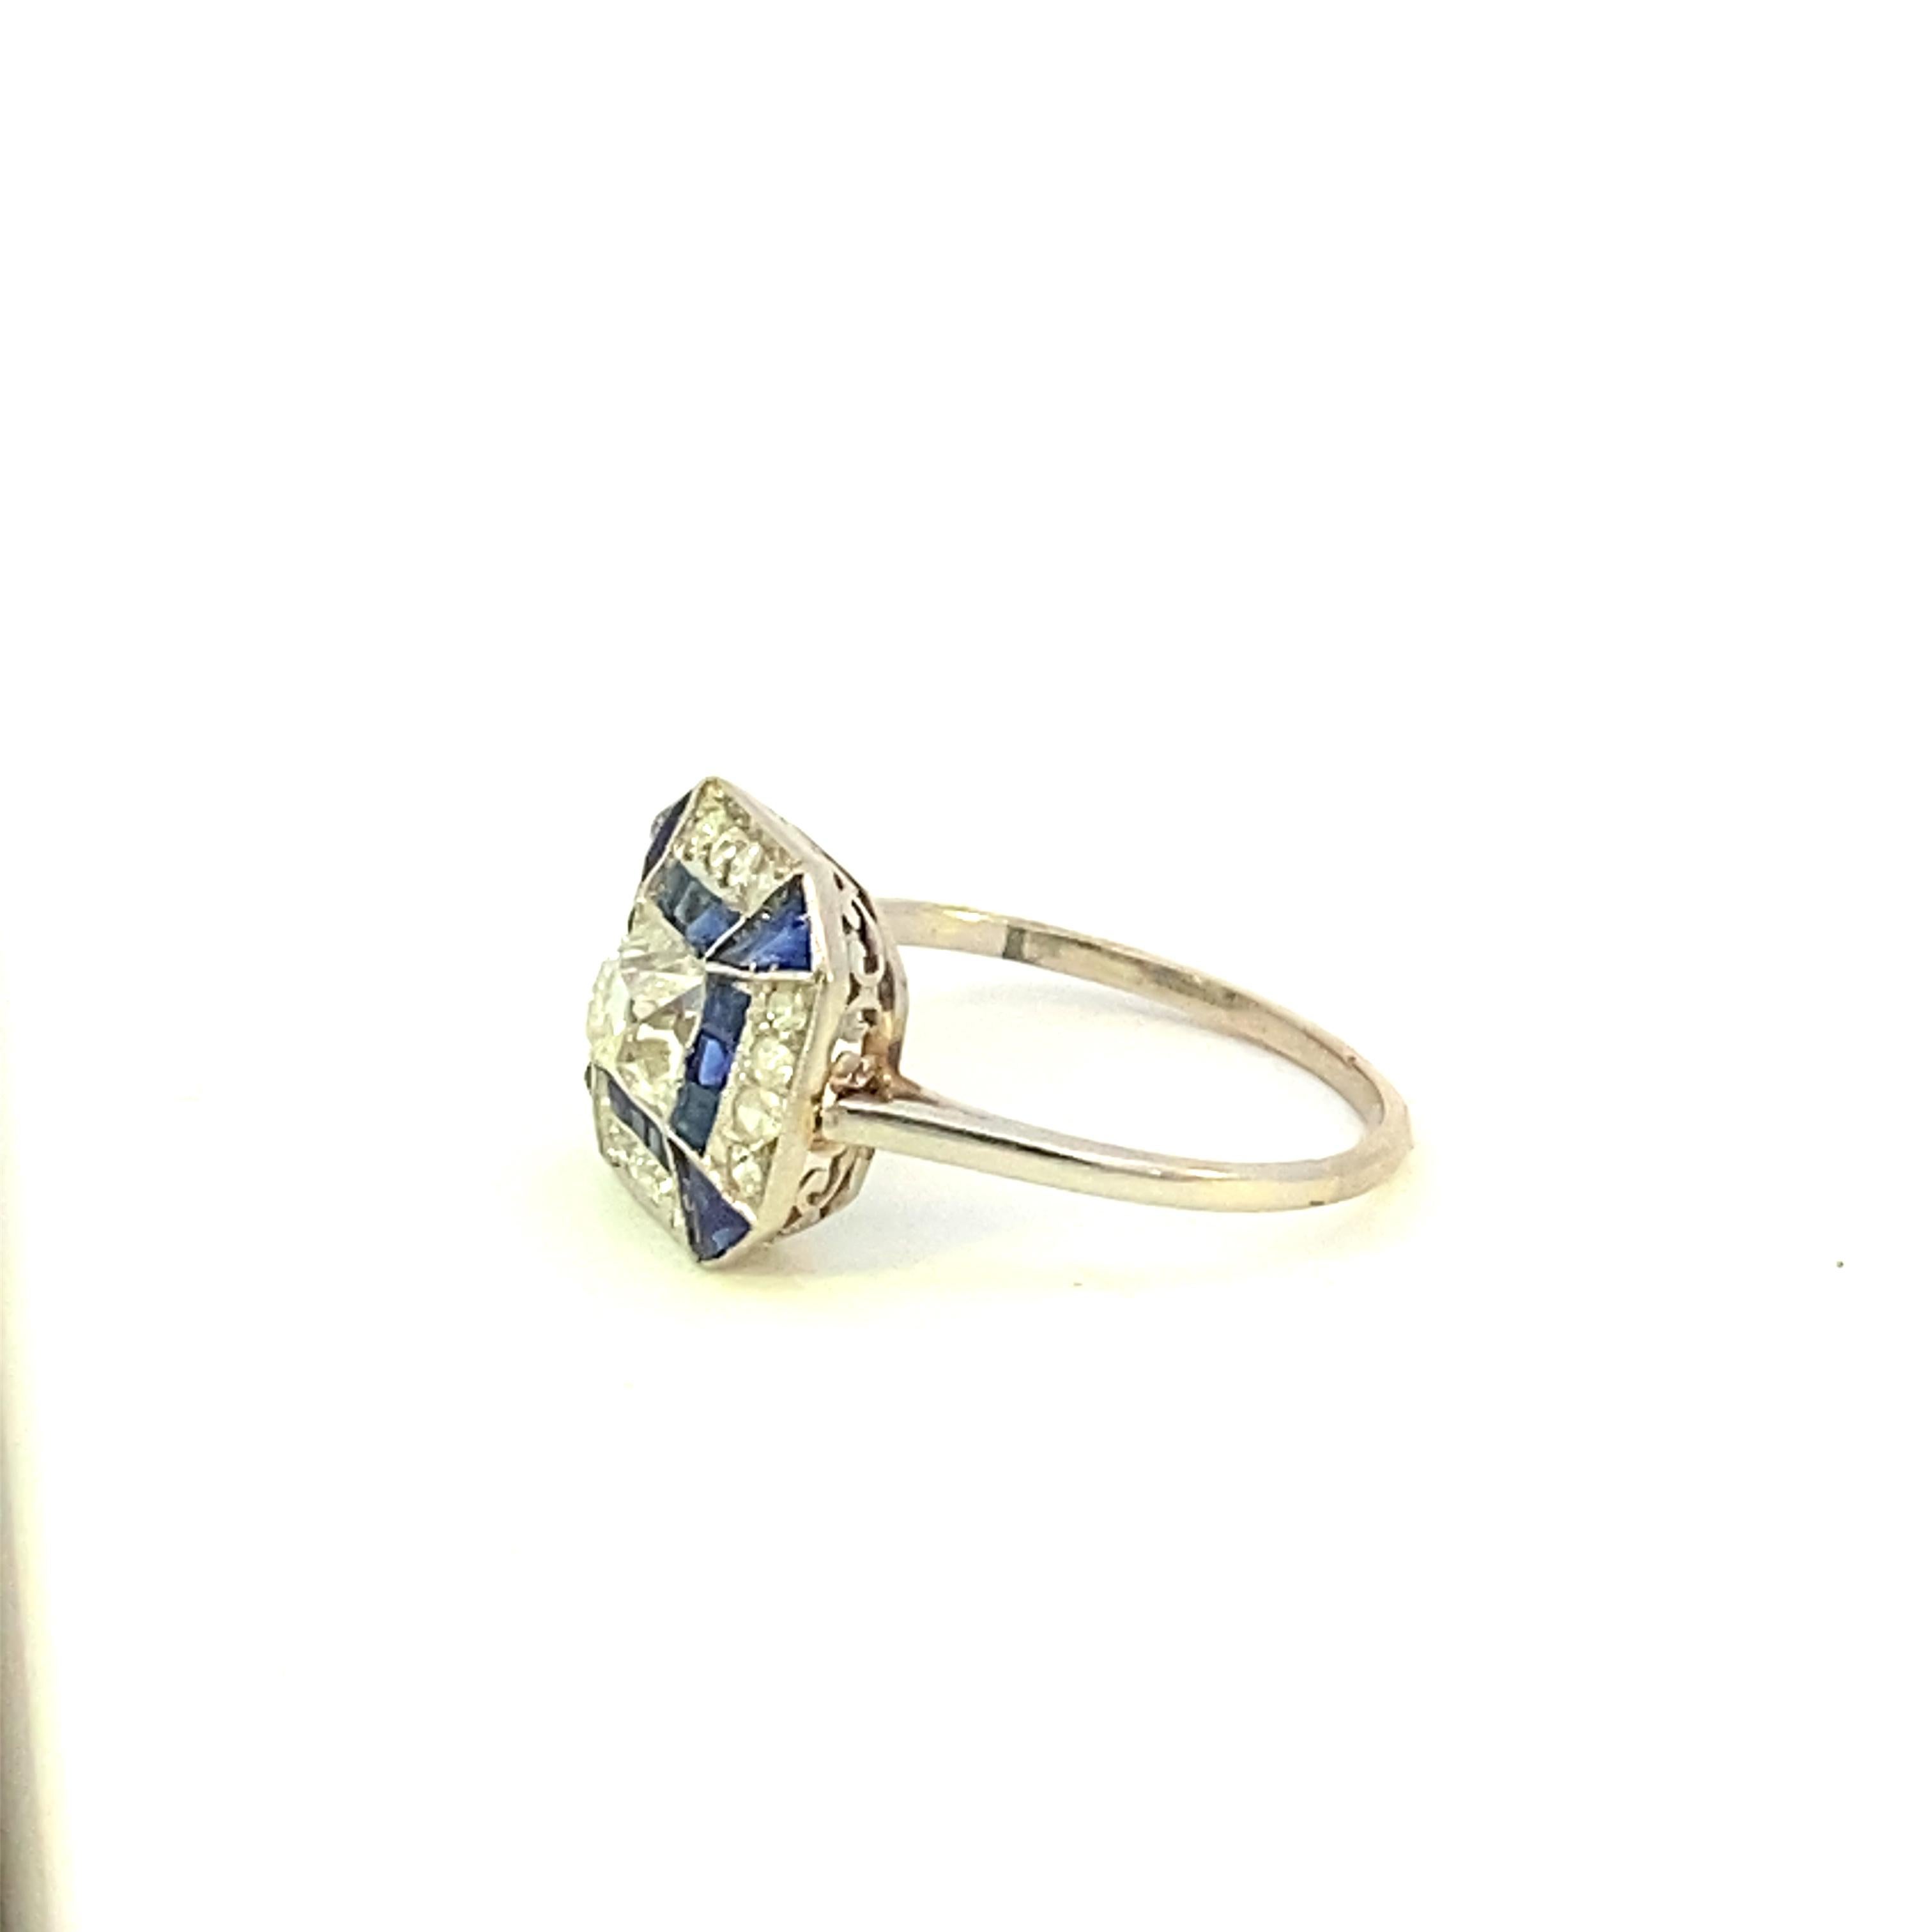 Platinum one 0.50 carat Old Mine Cut center diamond and 0.35 carat total weight sapphires, and 0.40 carat total weight accent diamonds. Size 8.25 US